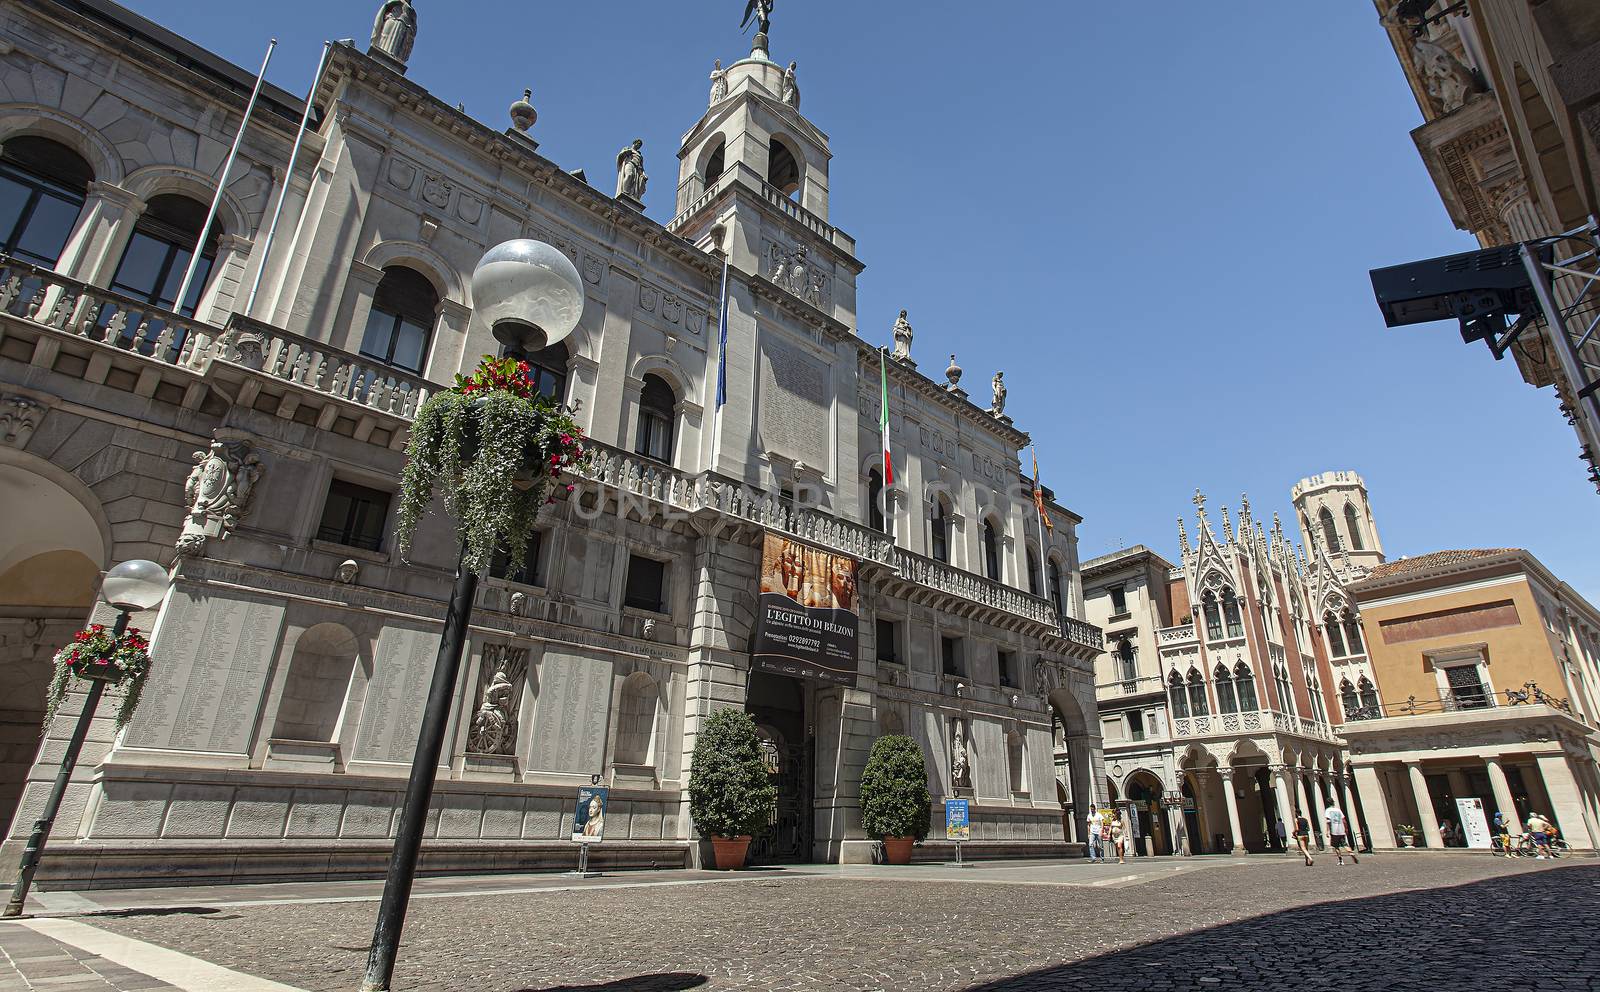 PADOVA, ITALY 17 JULY 2020: Cavour square in Padua, Italy